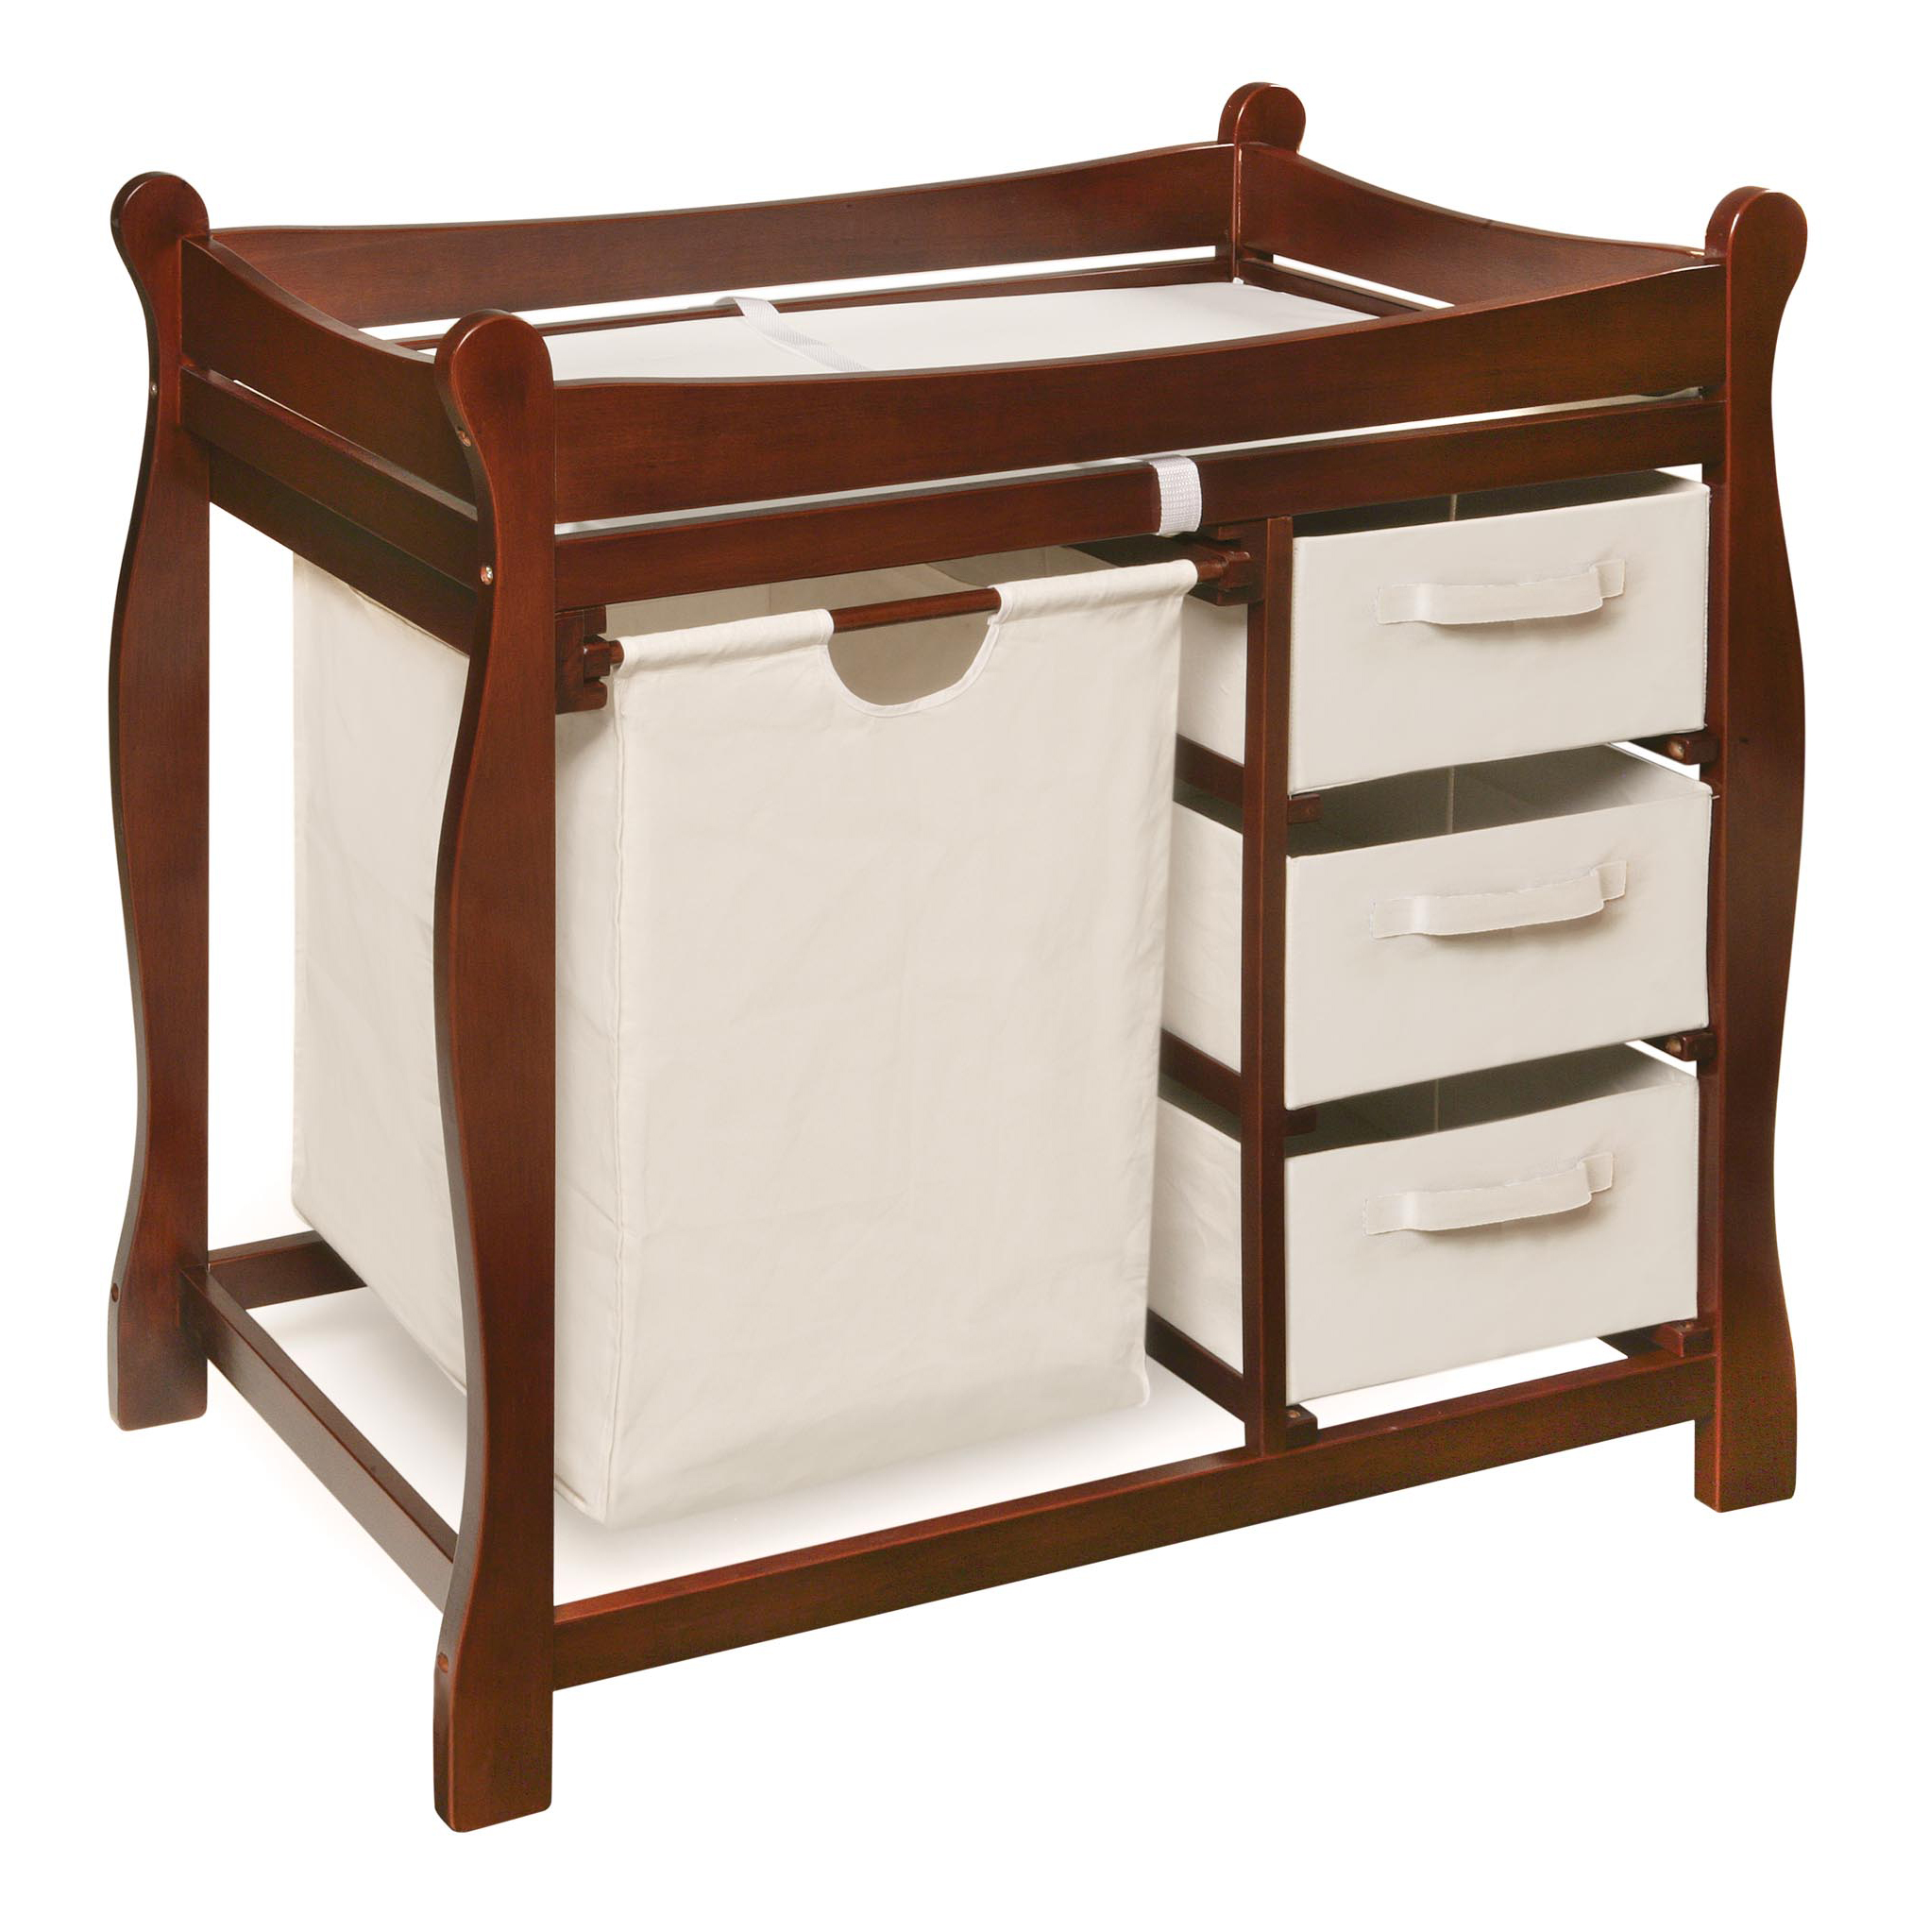 Sleigh Style Baby Changing Table with Hamper and 3 Baskets - Cherry